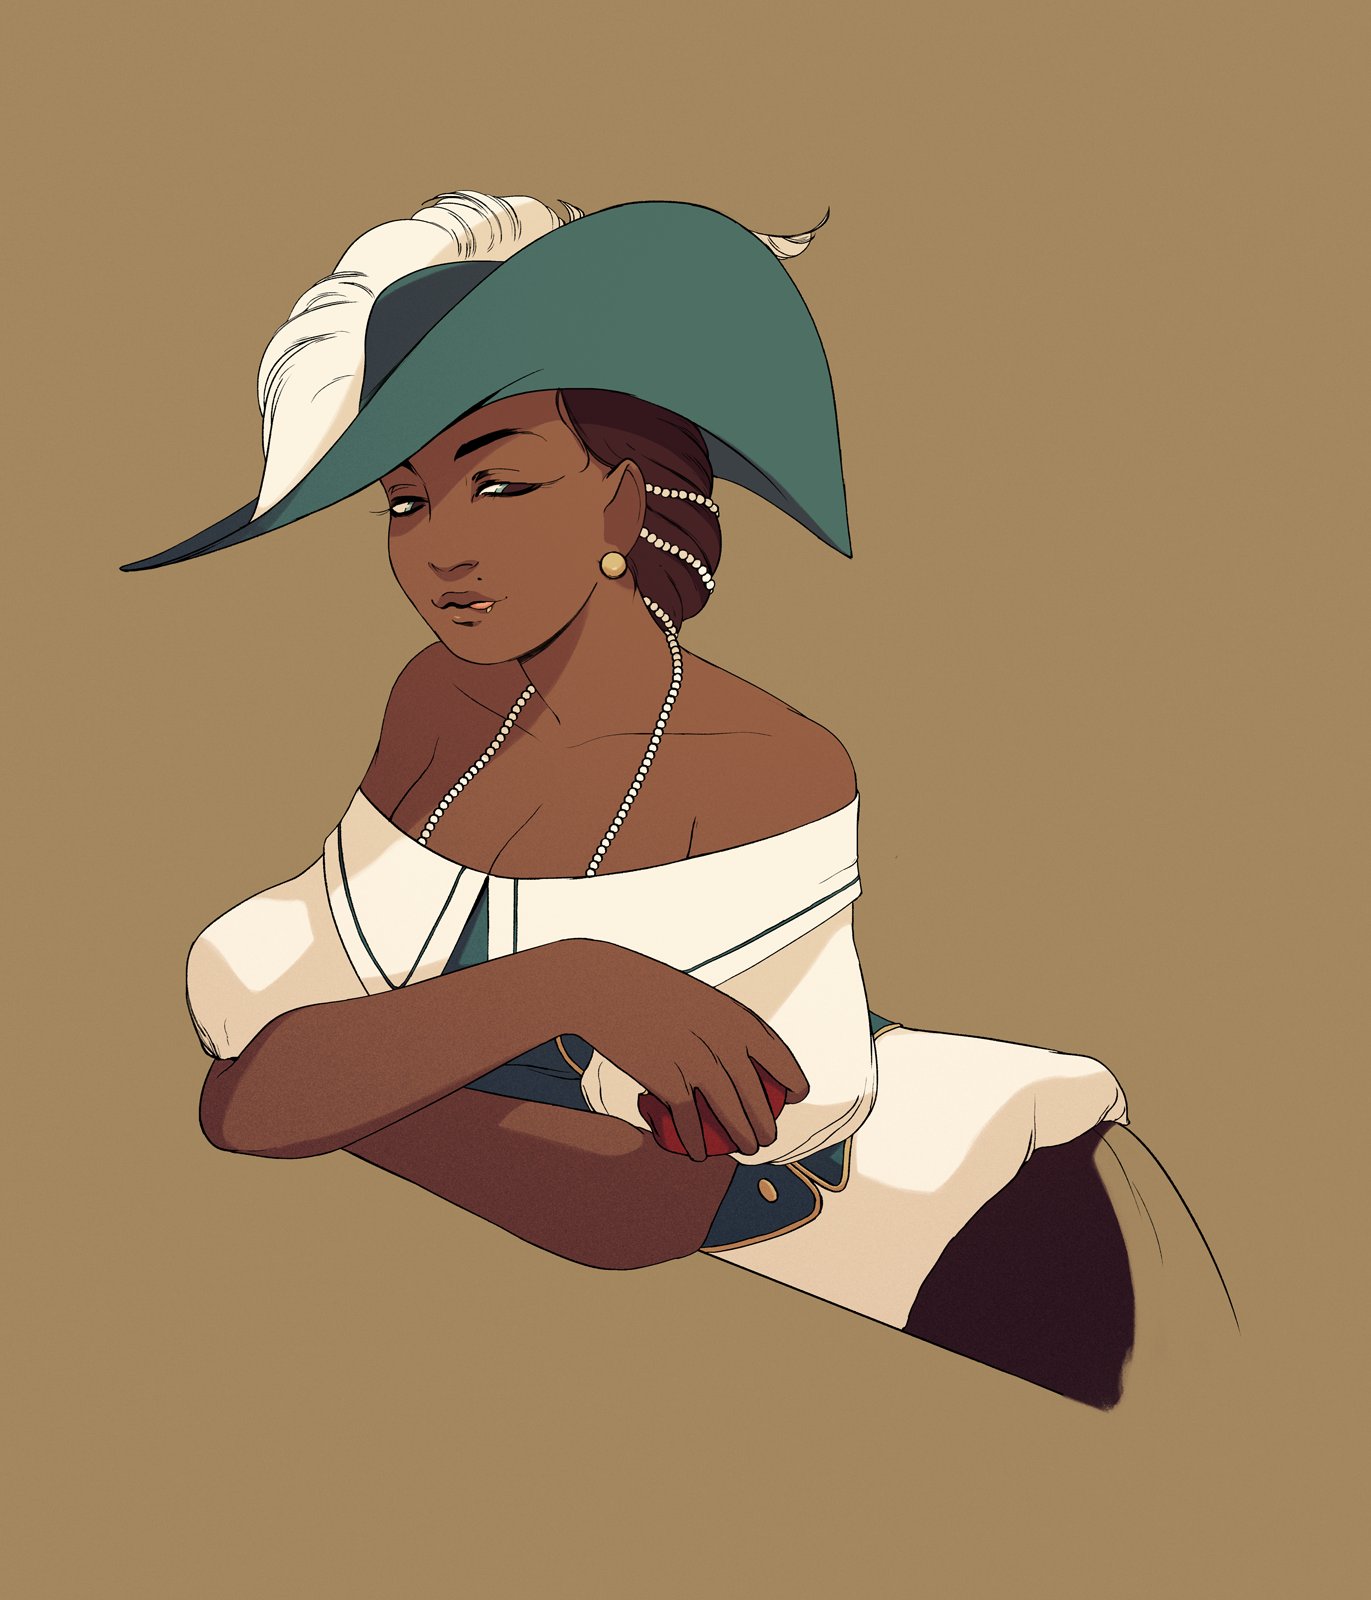 A digital drawing of a brown-skinned woman leaning casually against a ledge. She's wearing a pirate-like outfit and a flamboyant blue hat with a feather in it. She's holding a half-eaten apple and licking a piece of it off her lips, maybe a little flirtatiously. She's wearing a pearl necklace and pearls in her dark brown hair.